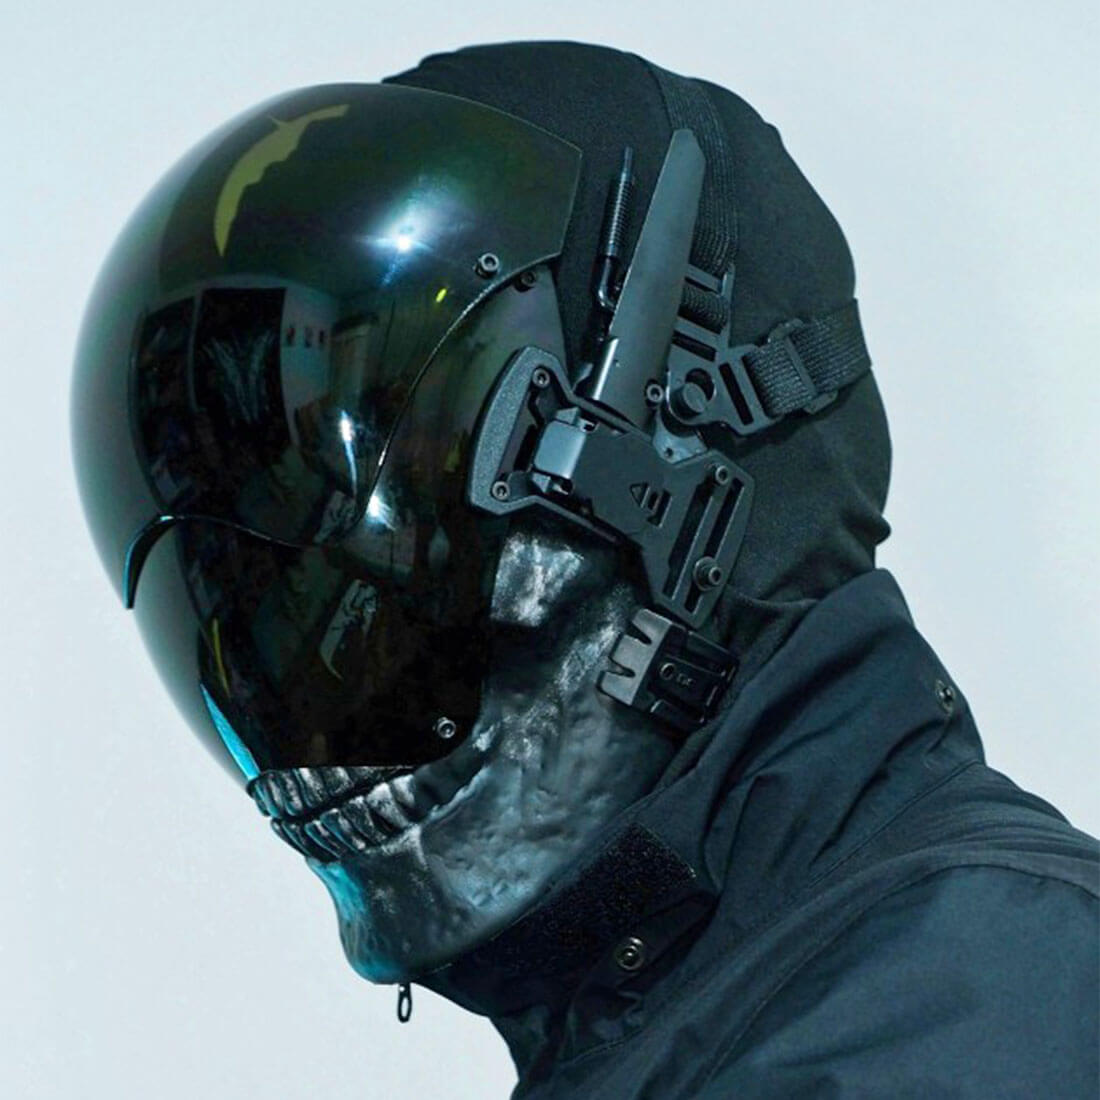 Future Cyberpunk Tactical Helmet Mask Cosplay Costume Props with